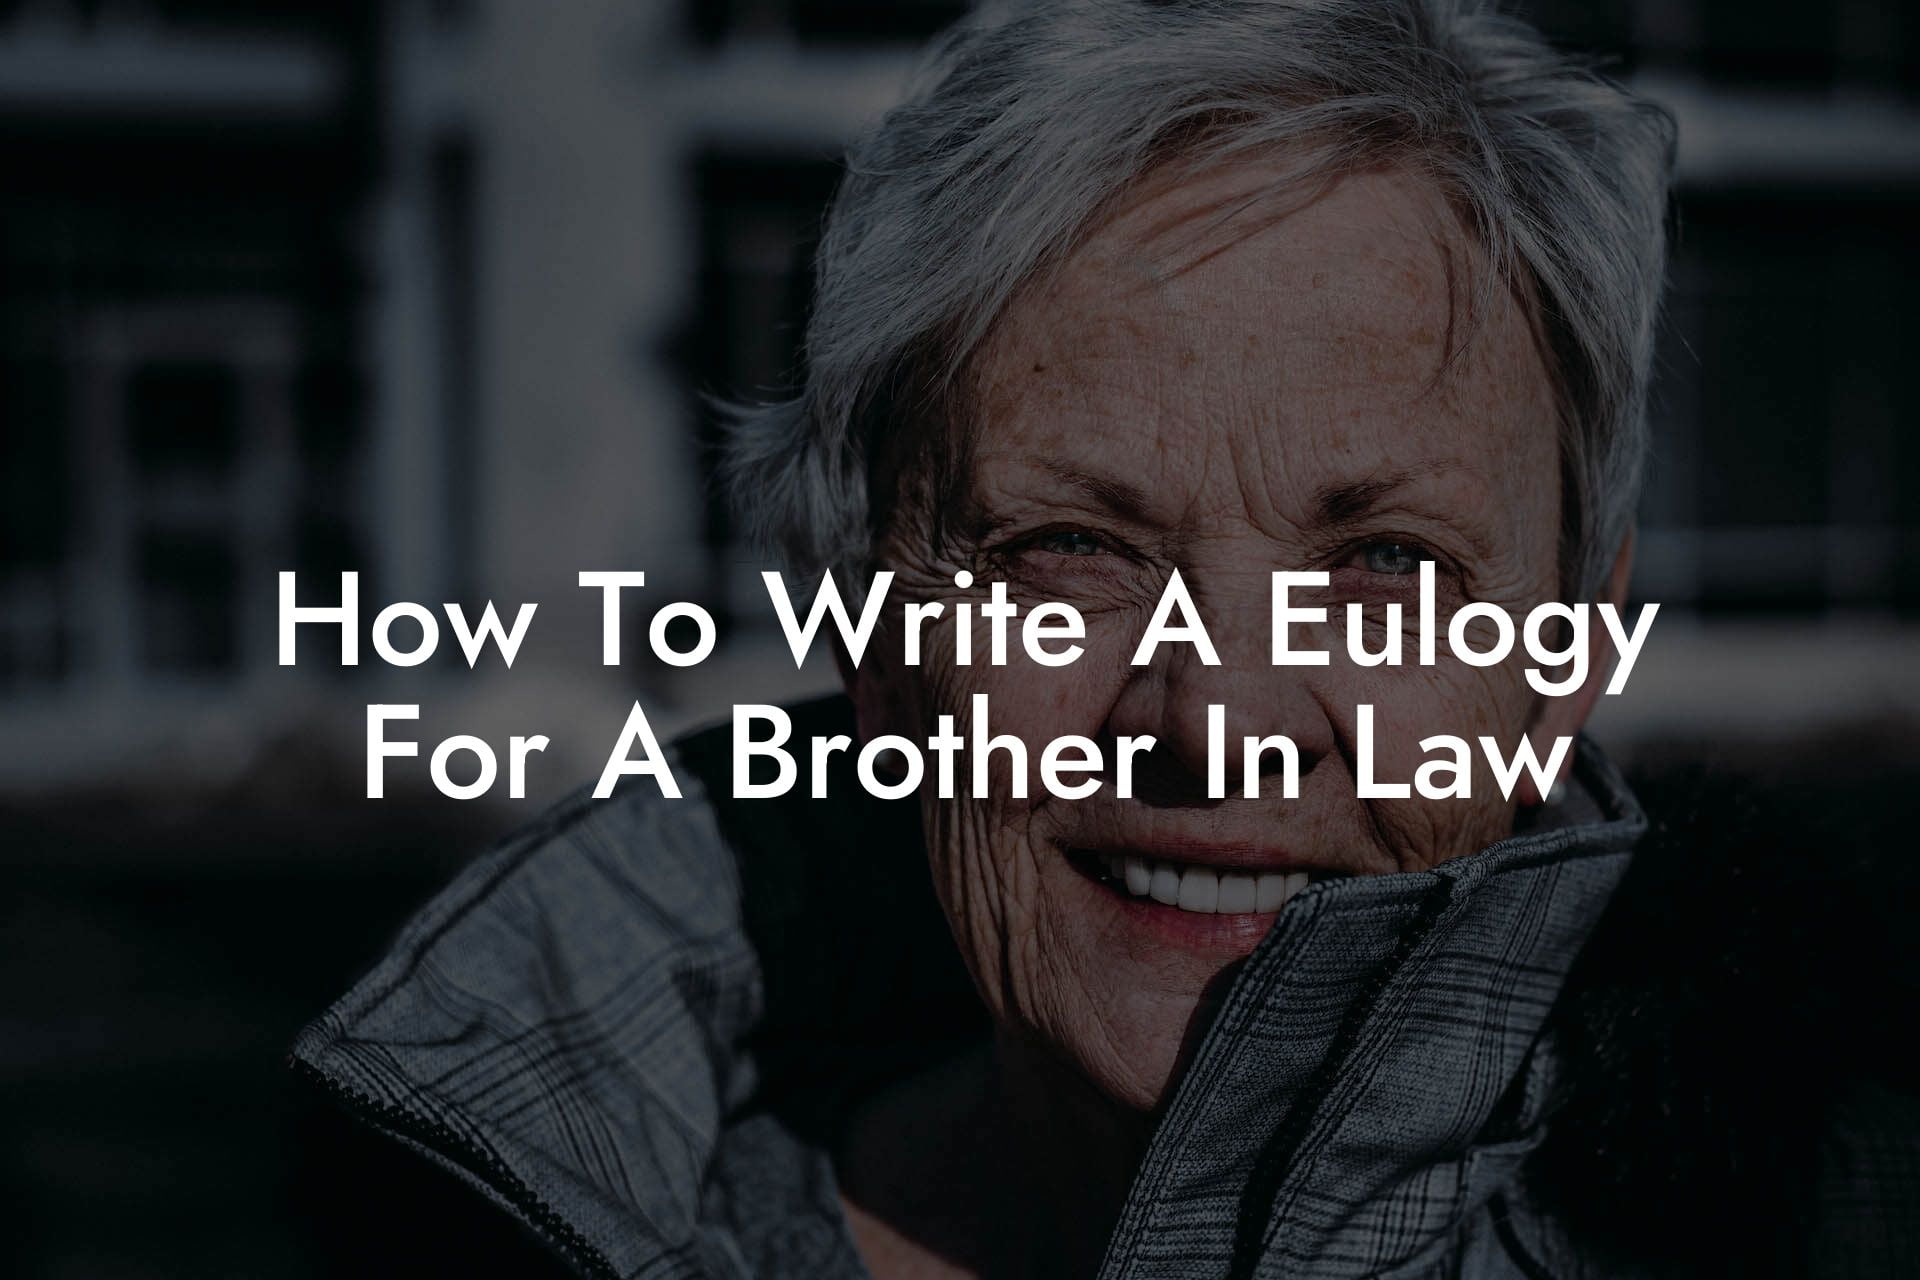 How To Write A Eulogy For A Brother In Law